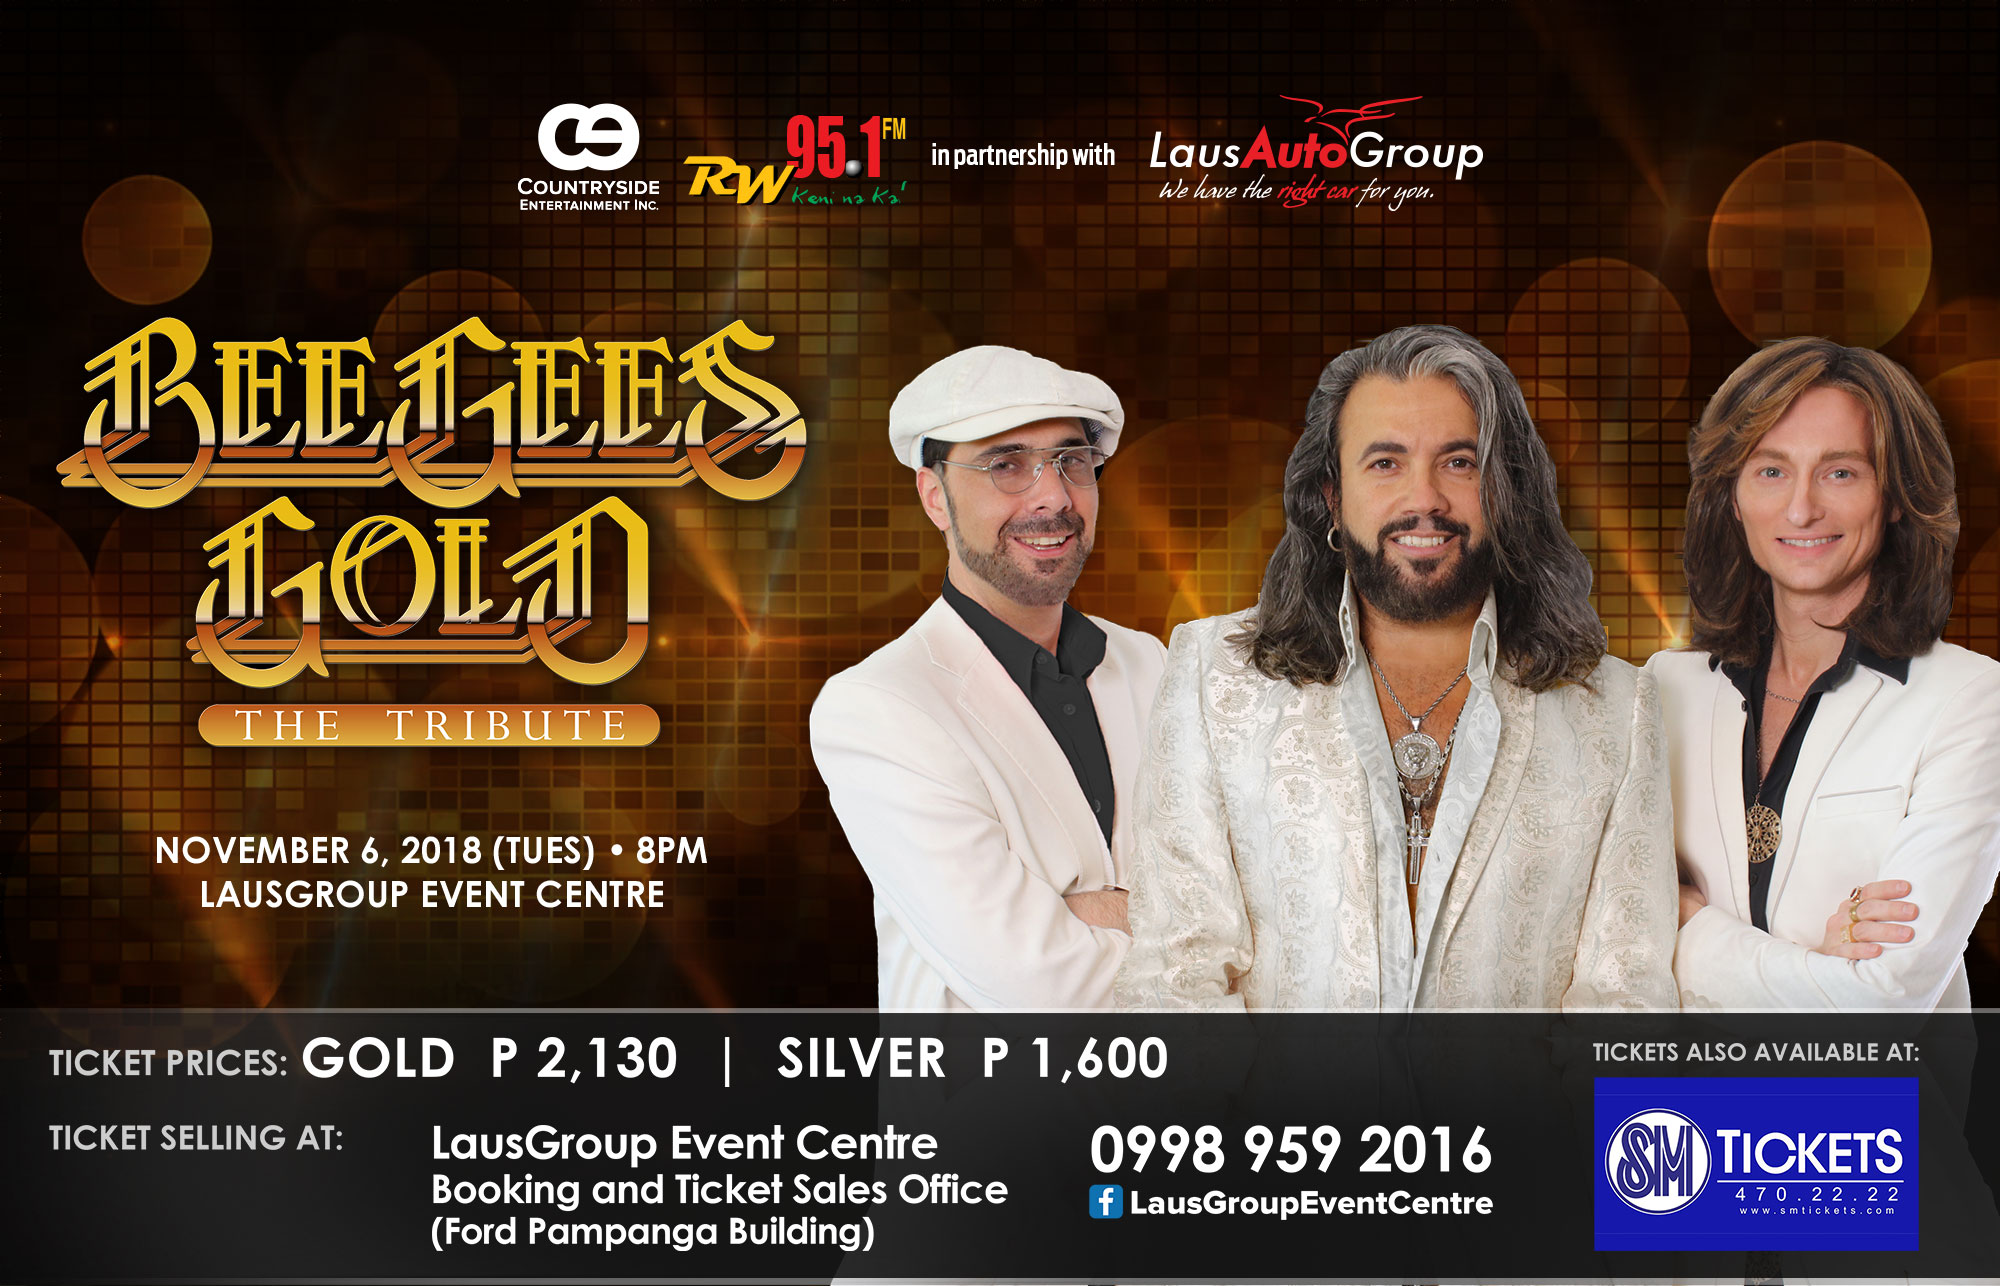 One Golden Chance to Experience Bee Gees in Pampanga